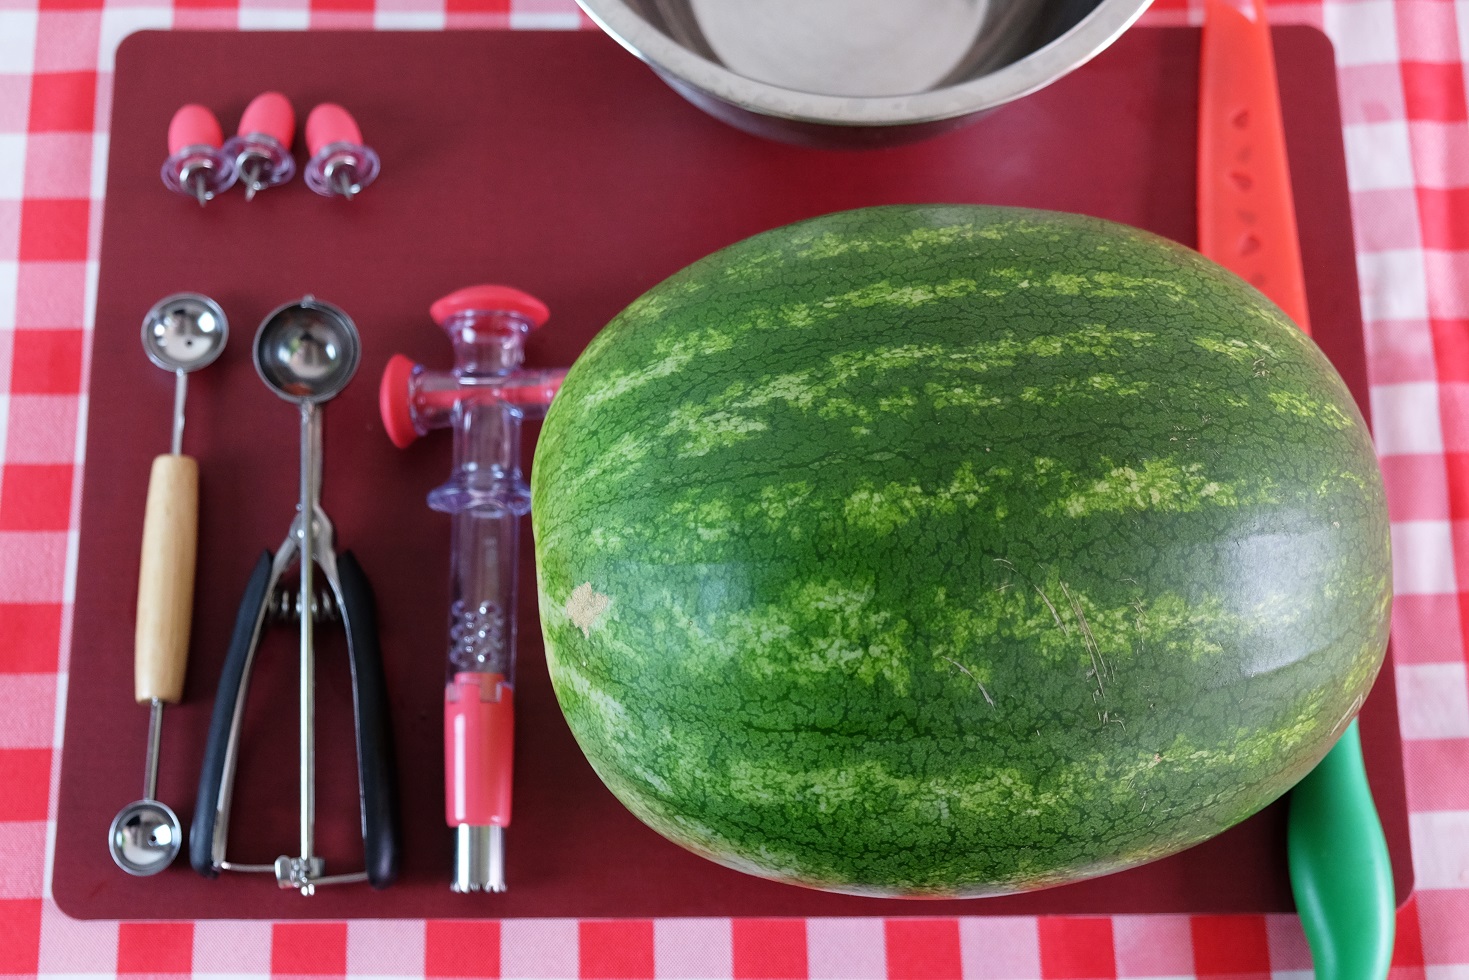 tools and watermelon